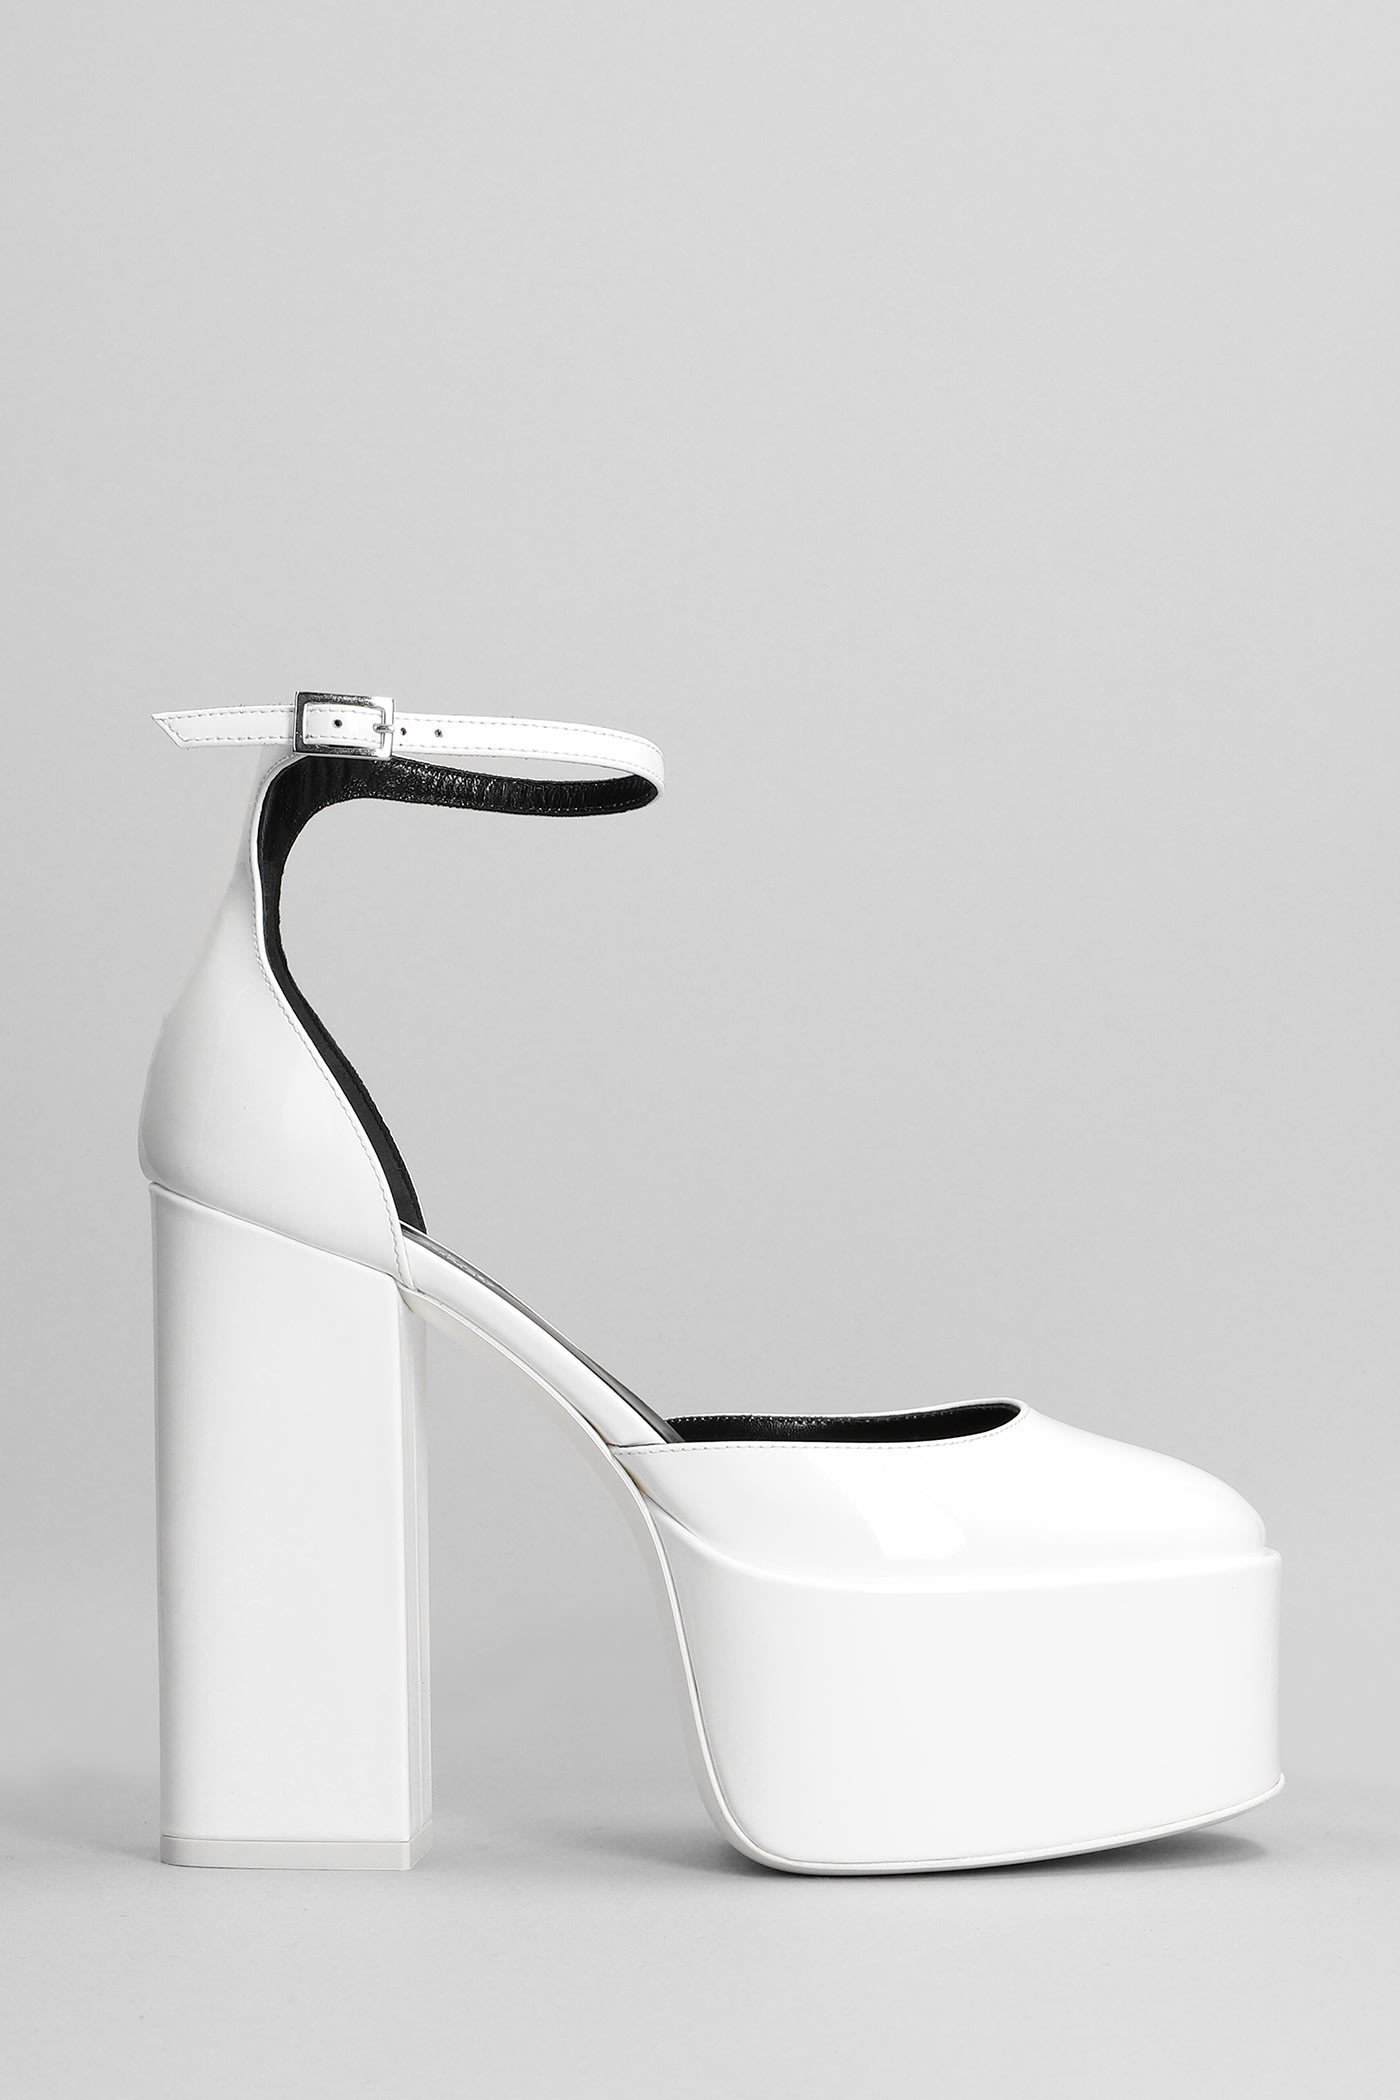 Paris Texas Dalilah Pumps In White Patent Leather